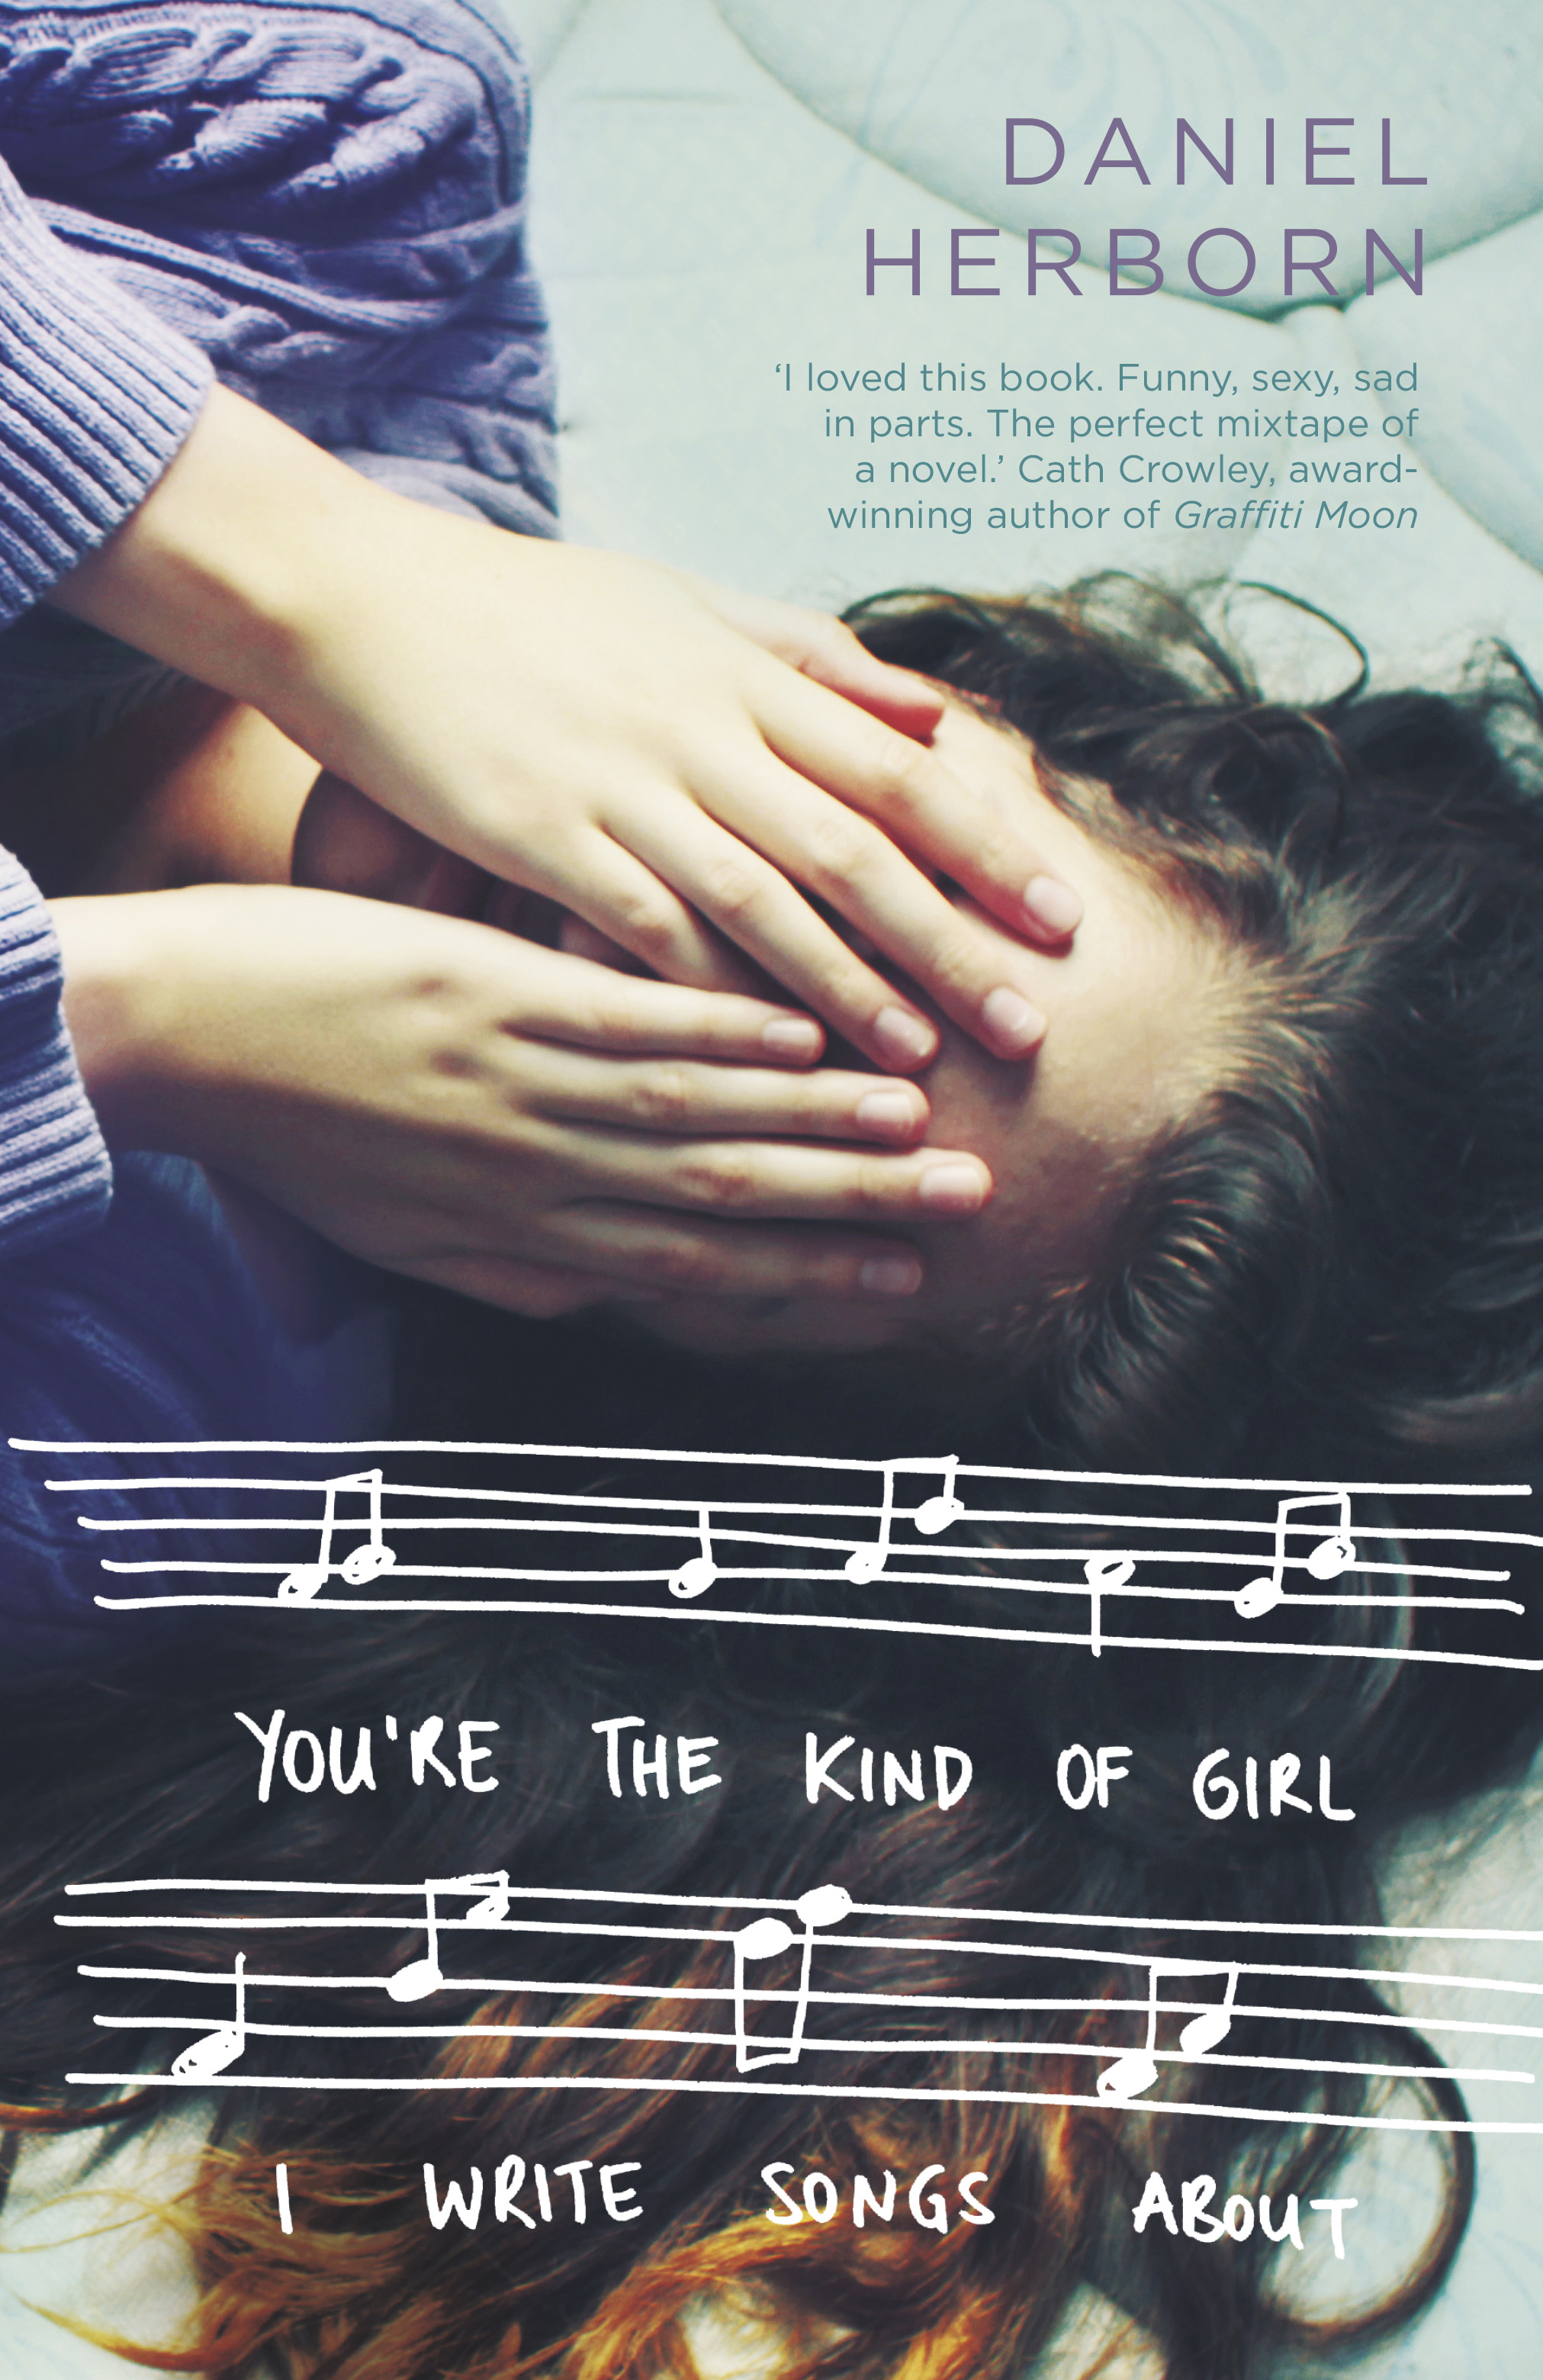 Wrote this song. The perfect girl песня обложка. KNG. Книга девушка песни. Songs about girls.